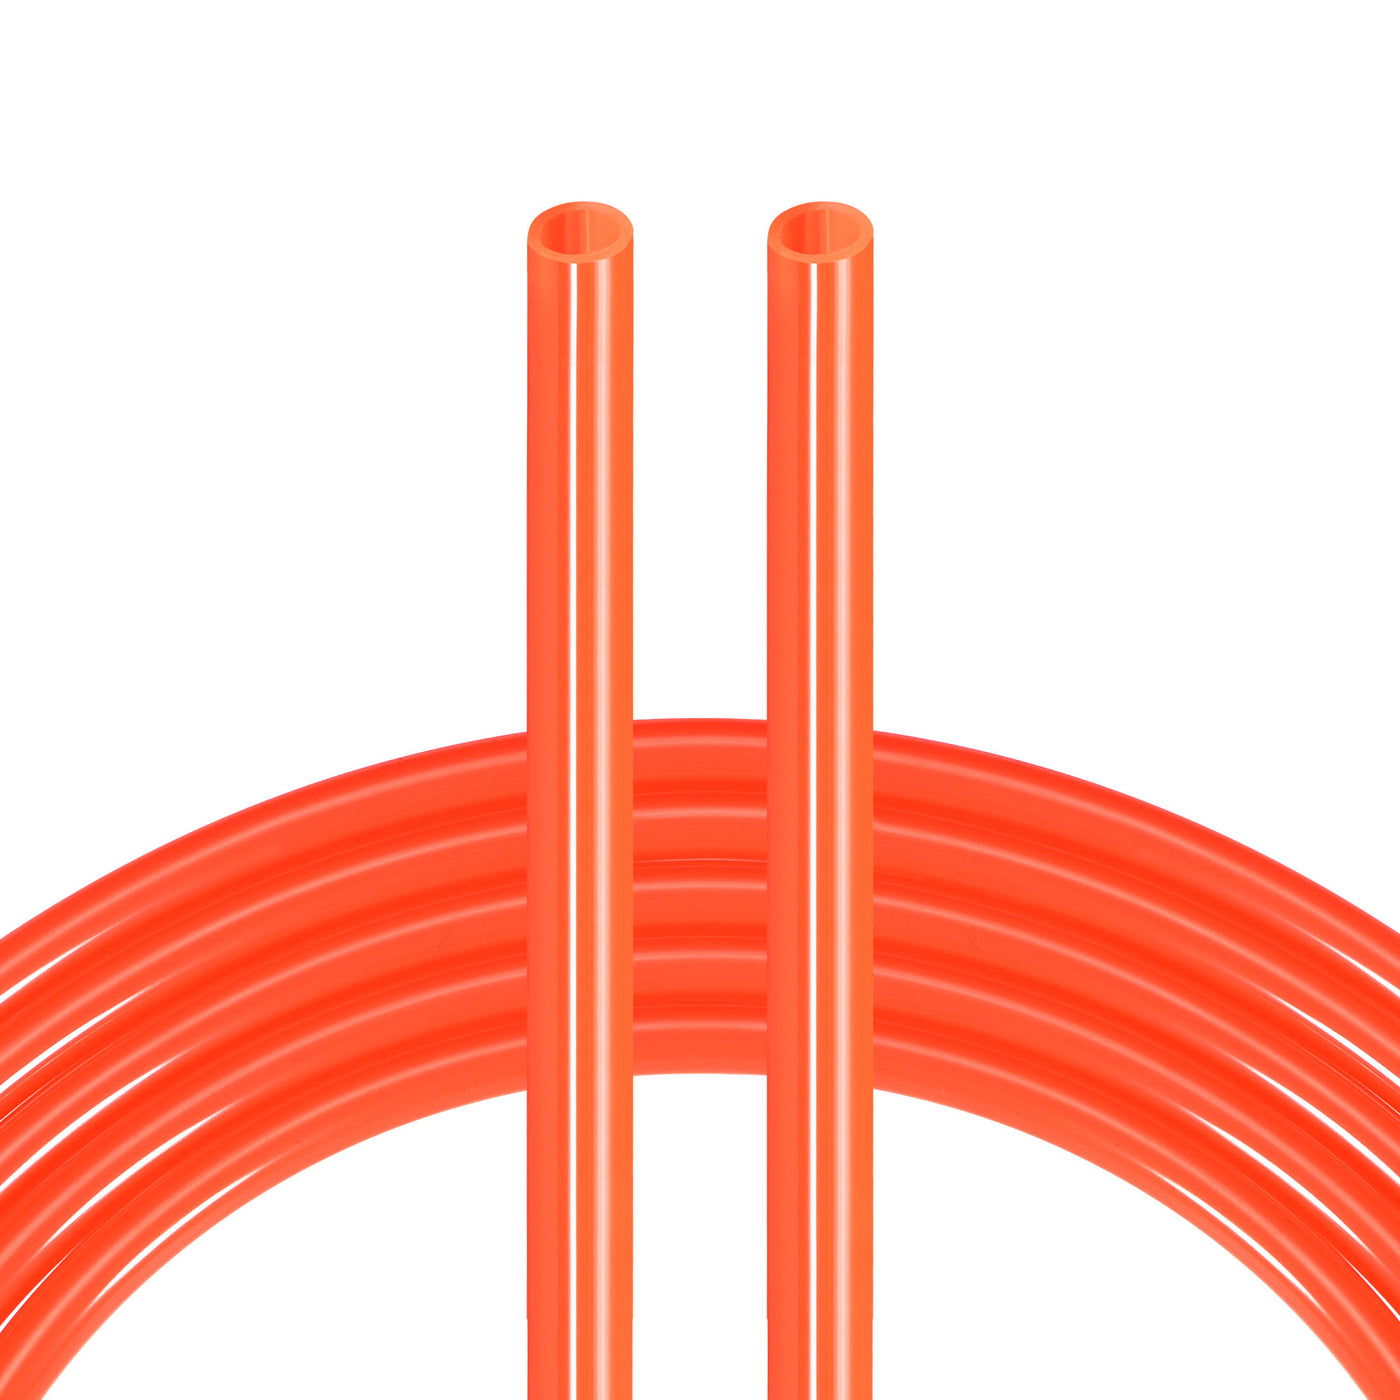 uxcell Uxcell Pneumatic Air Hose Tubing Air Compressor Tube 4mm/0.16''ID x 6mm/0.23''OD x 12m/39.4Ft Polyurethane Pipe Bright Orange